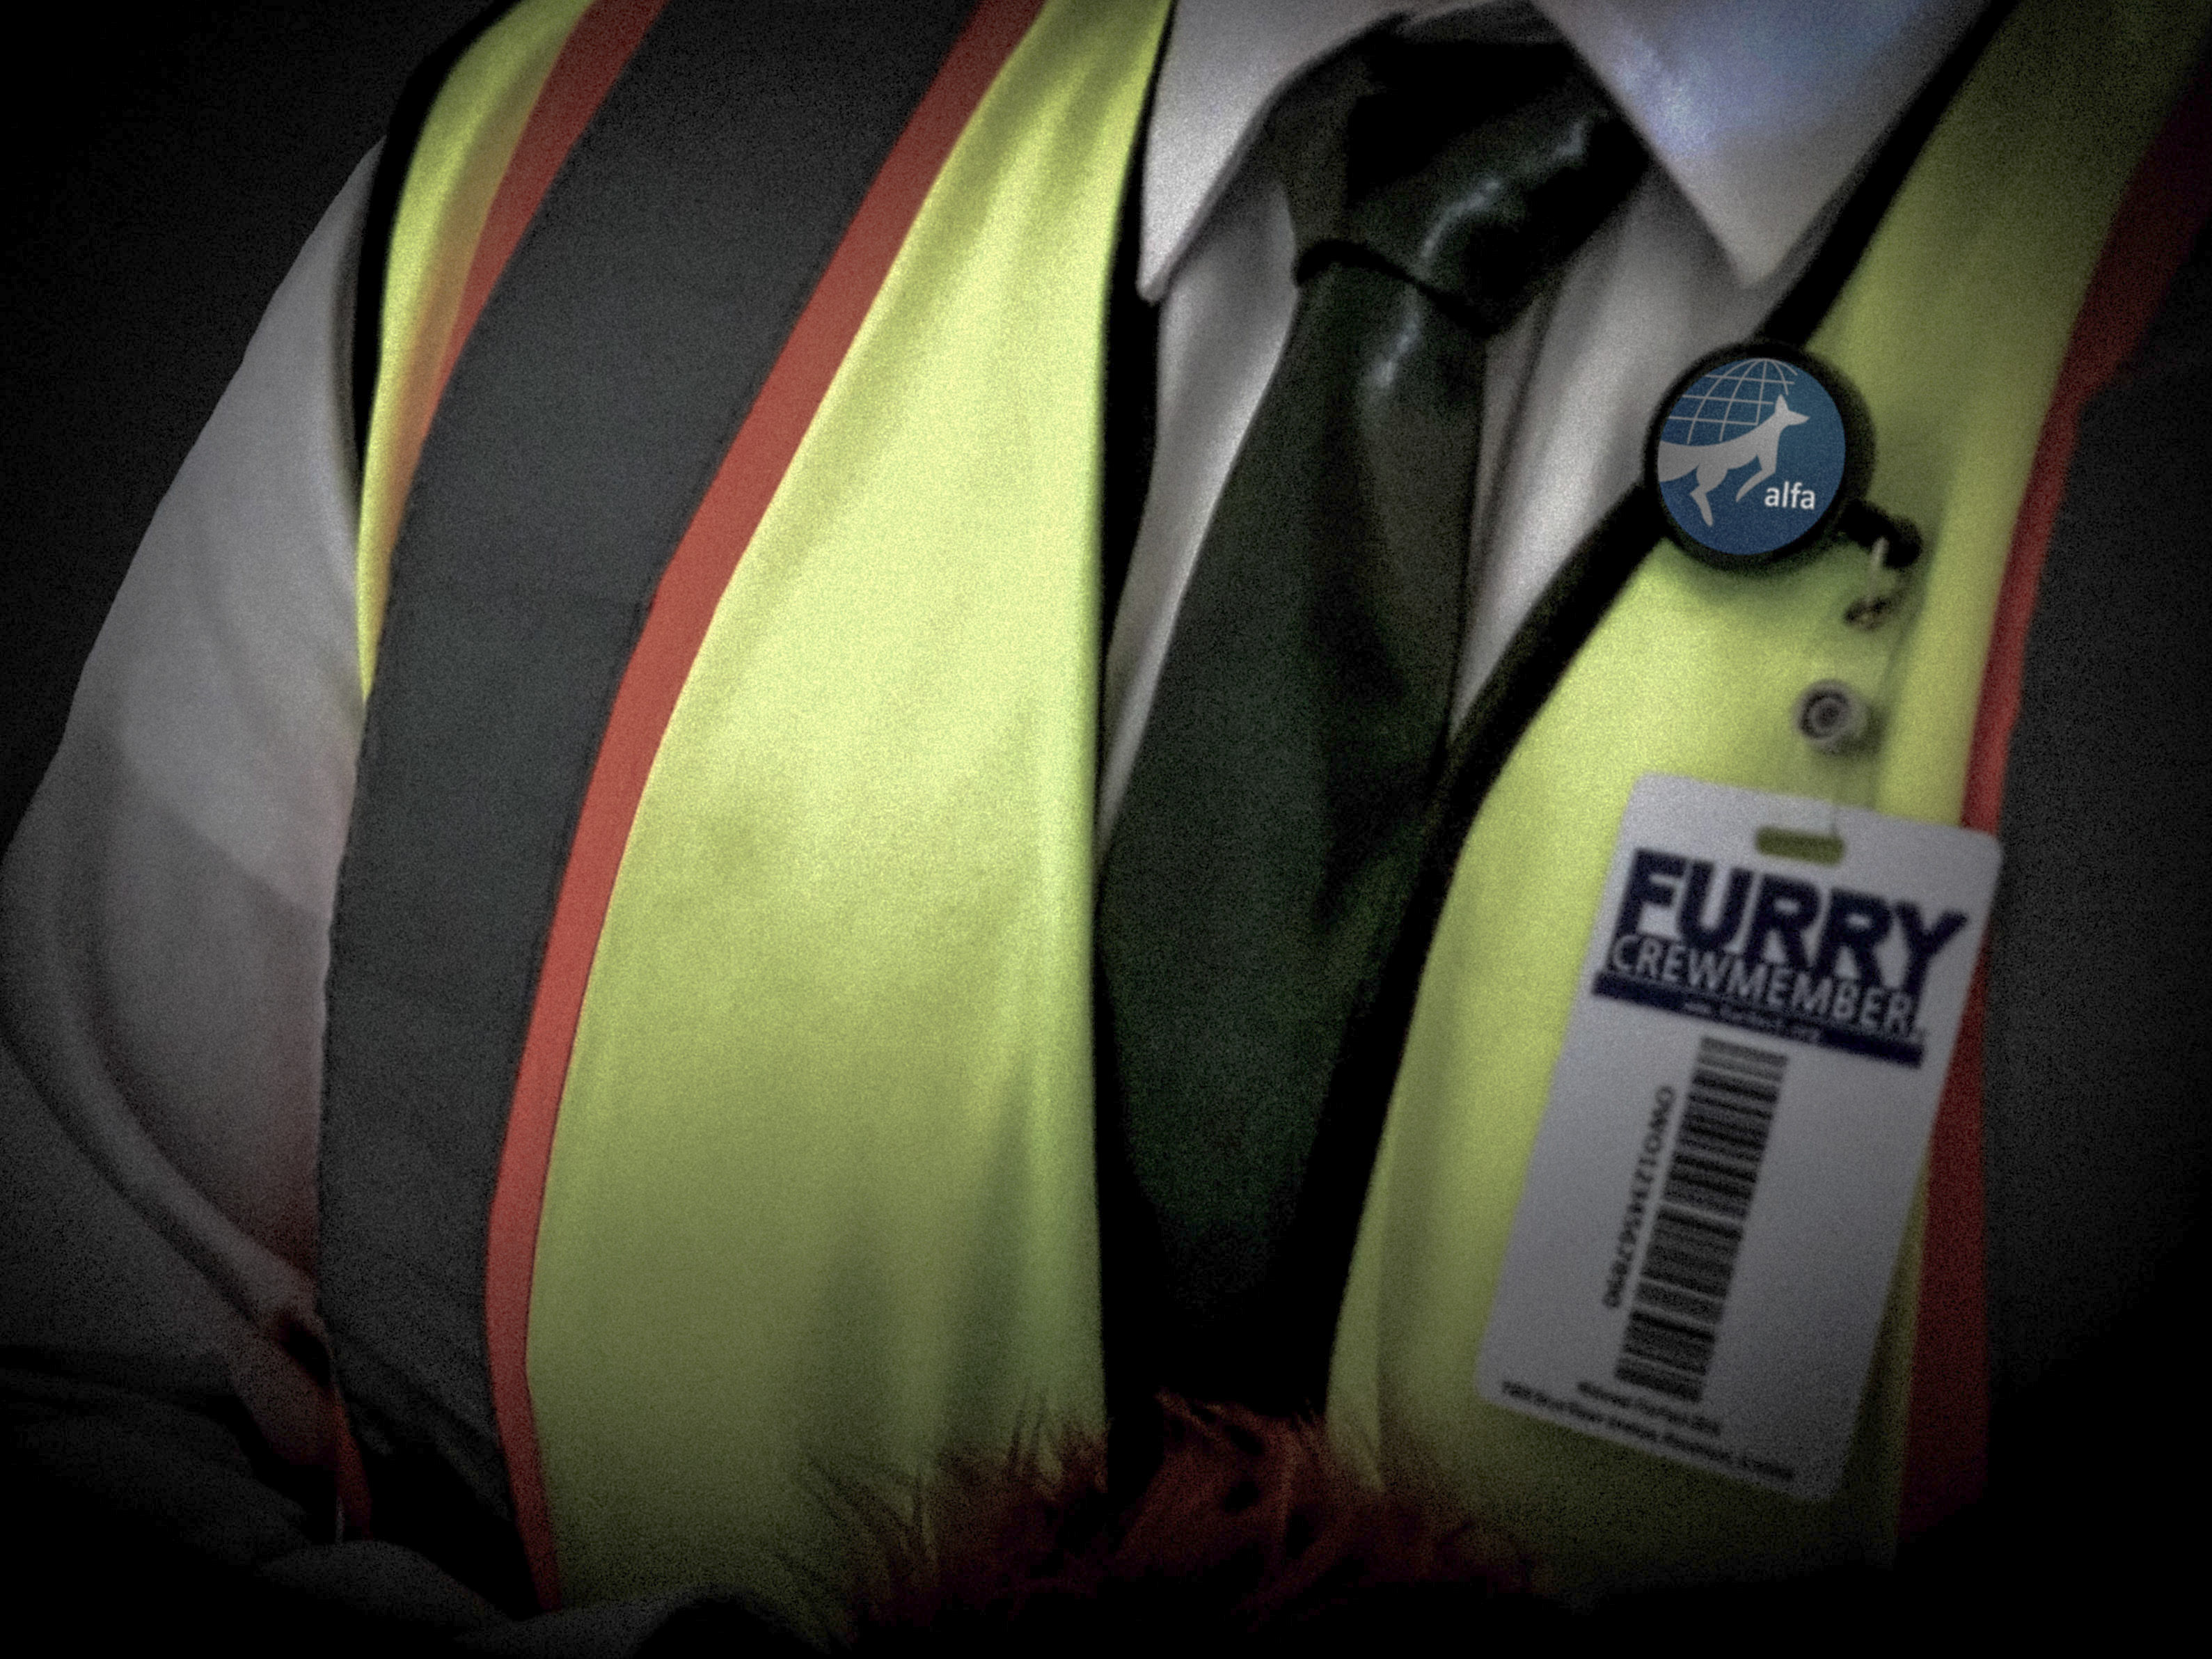 A person wearing a white button-up long-sleeved shirt, black tie, high-visibility yellow safety vest, and a circular badge reel with the ALFA logo in the circle. A 'Furry Crewmember' badge with barcode is attached to the badge reel.